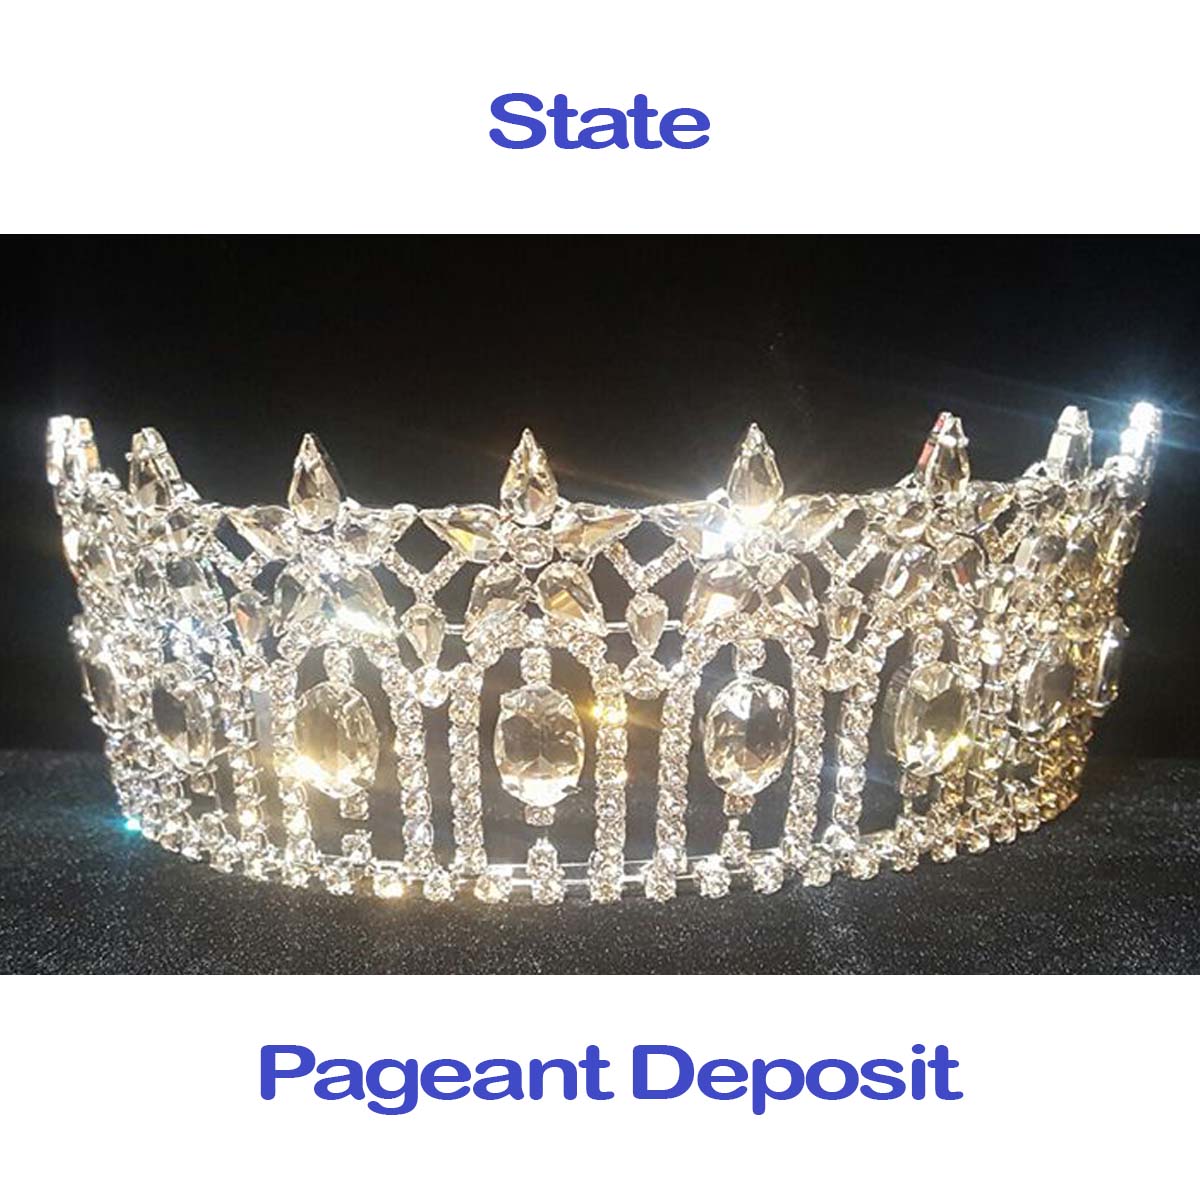 State Pageant Deposit